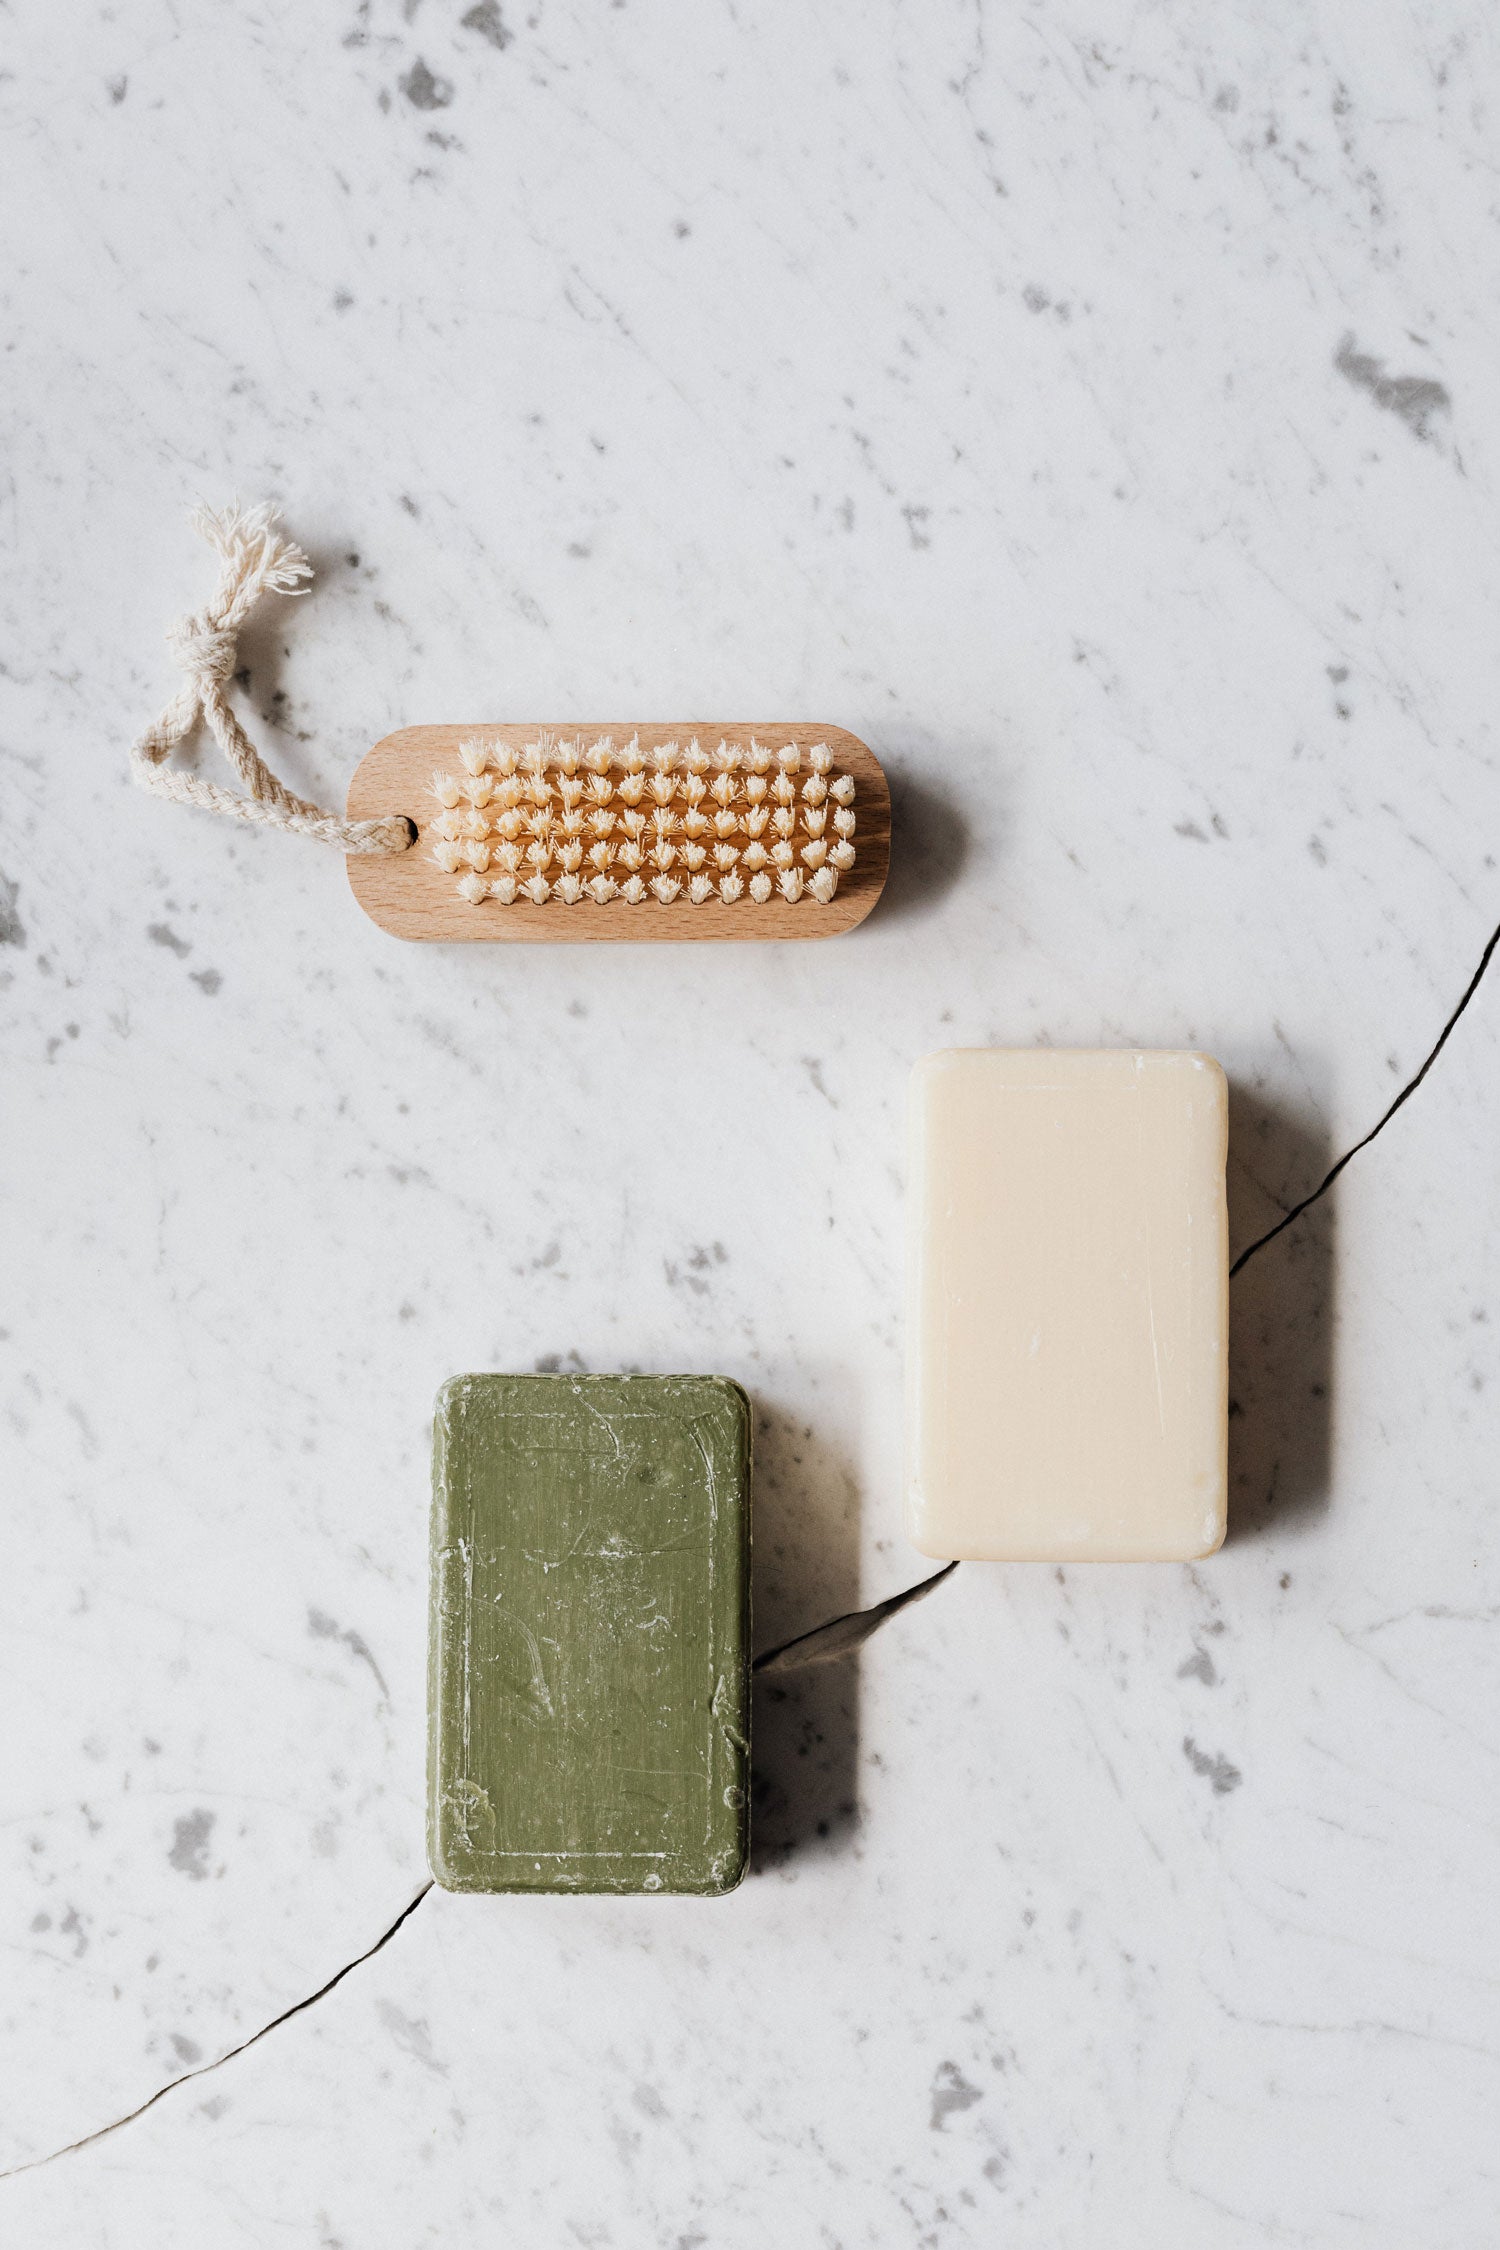 Image shows two bars of soap, one in green and one in cream, laying on a grey white marbled surface. A scrubbing brush lies next to them.